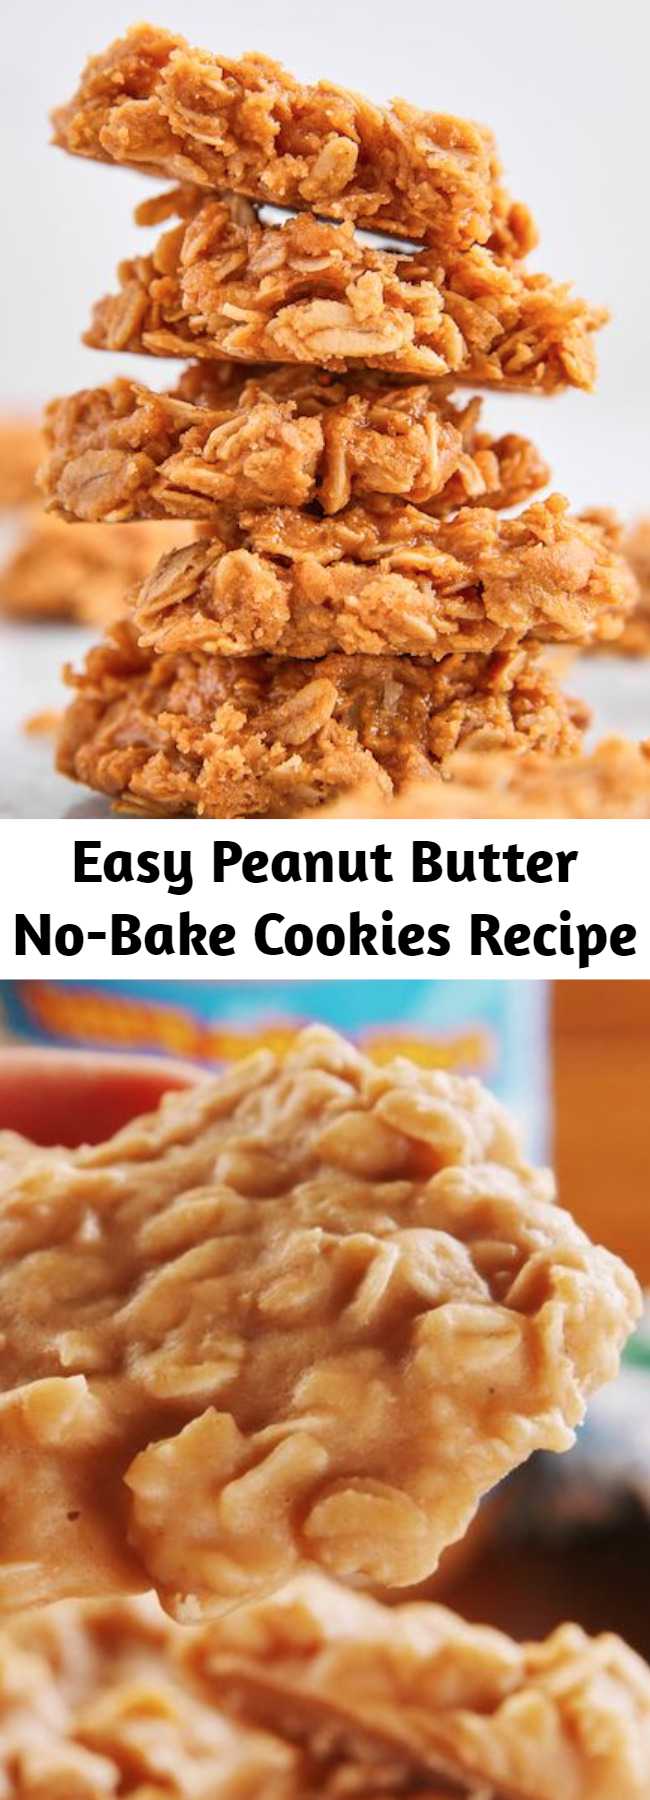 Easy Peanut Butter No-Bake Cookies Recipe - Loaded with sweet-salty peanut butter and chewy oats, these cookies are perfect for when you’re craving dessert but don’t have the time or patience to wait for your oven to preheat. The texture is a bit more fudgy than your average cookie, and WE'RE OBSESSED. #easy #recipe #nobake #oatmeal #peanut #peanutbutter #butter #PB #healthy #salt #vanilla